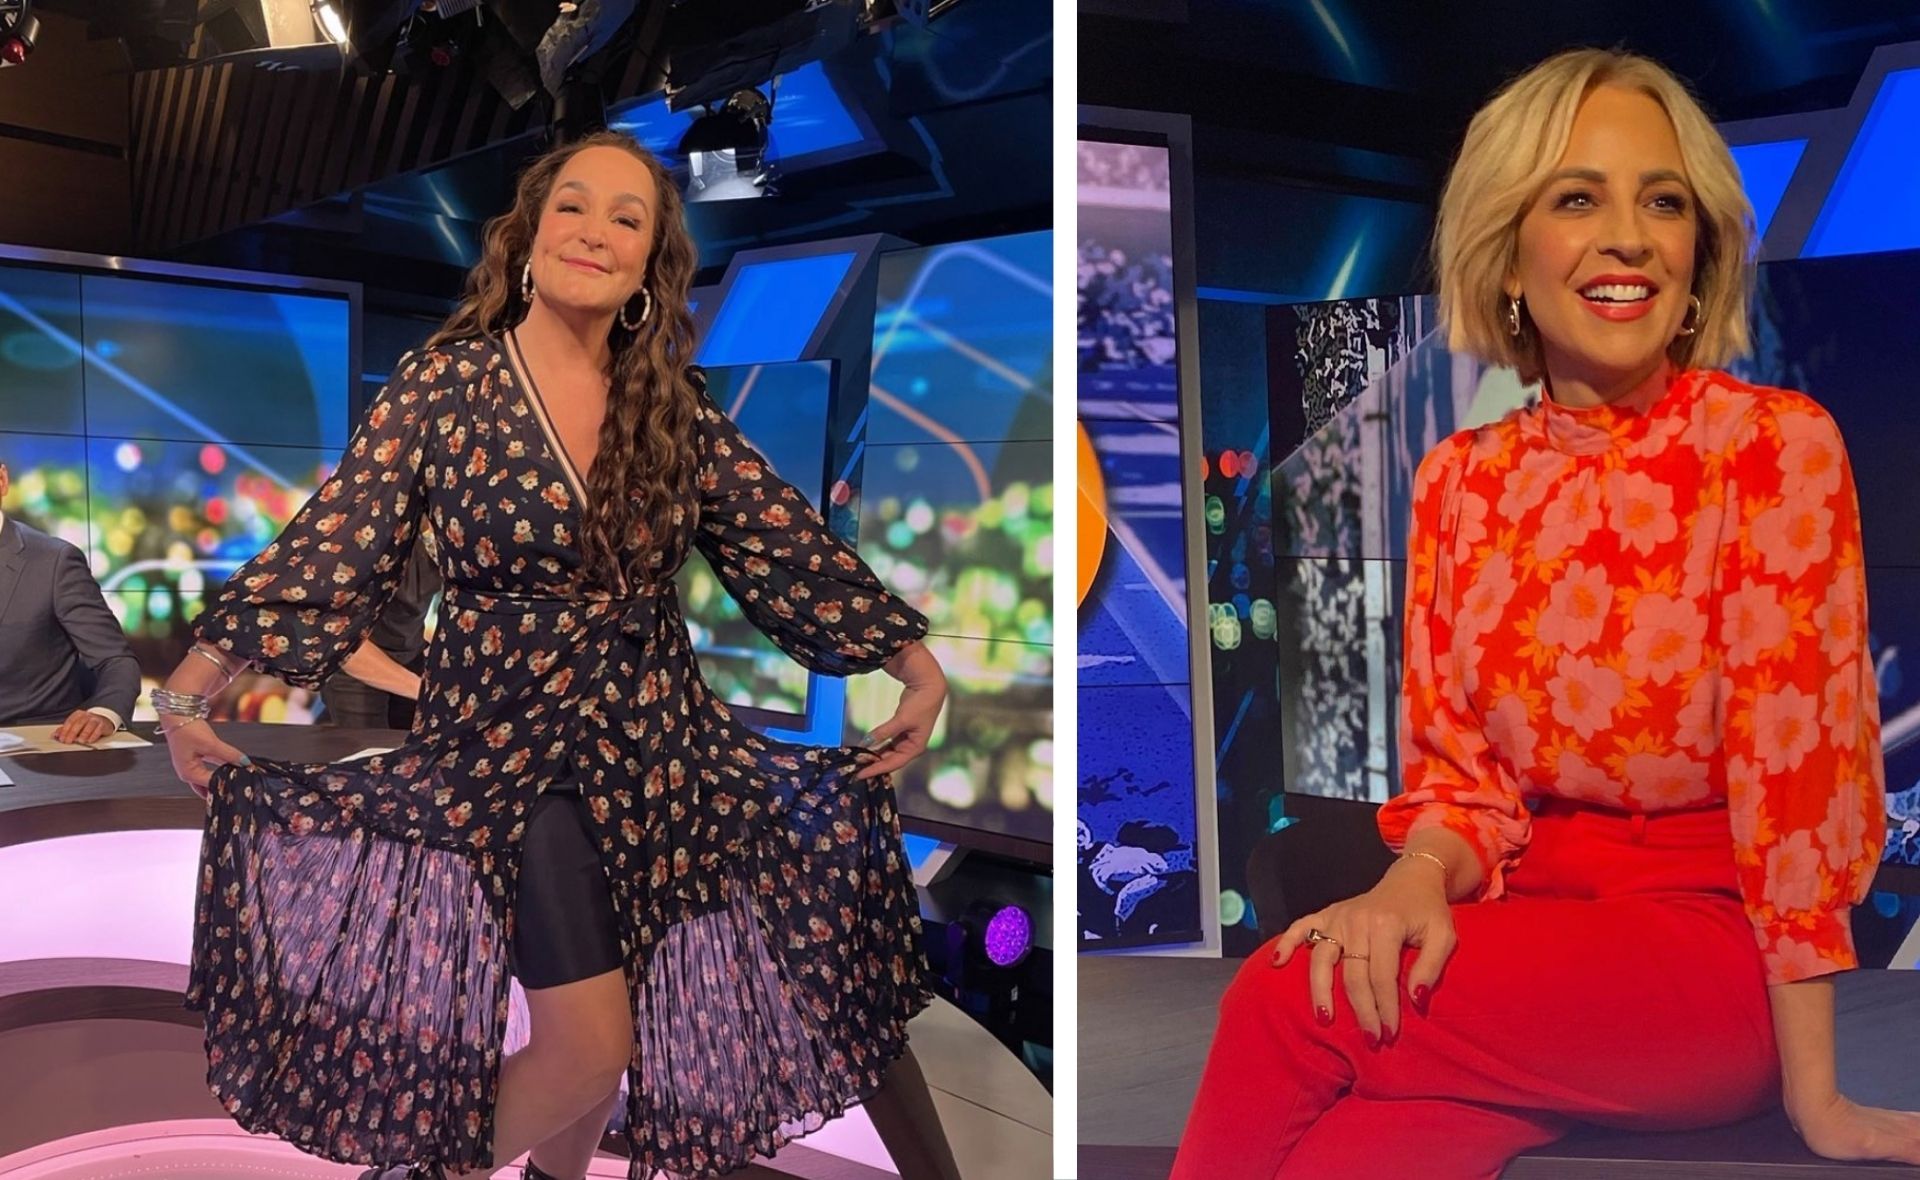 The Project’s Carrie Bickmore and Kate Langbroek are hilariously photobombed by a “handsome creep”